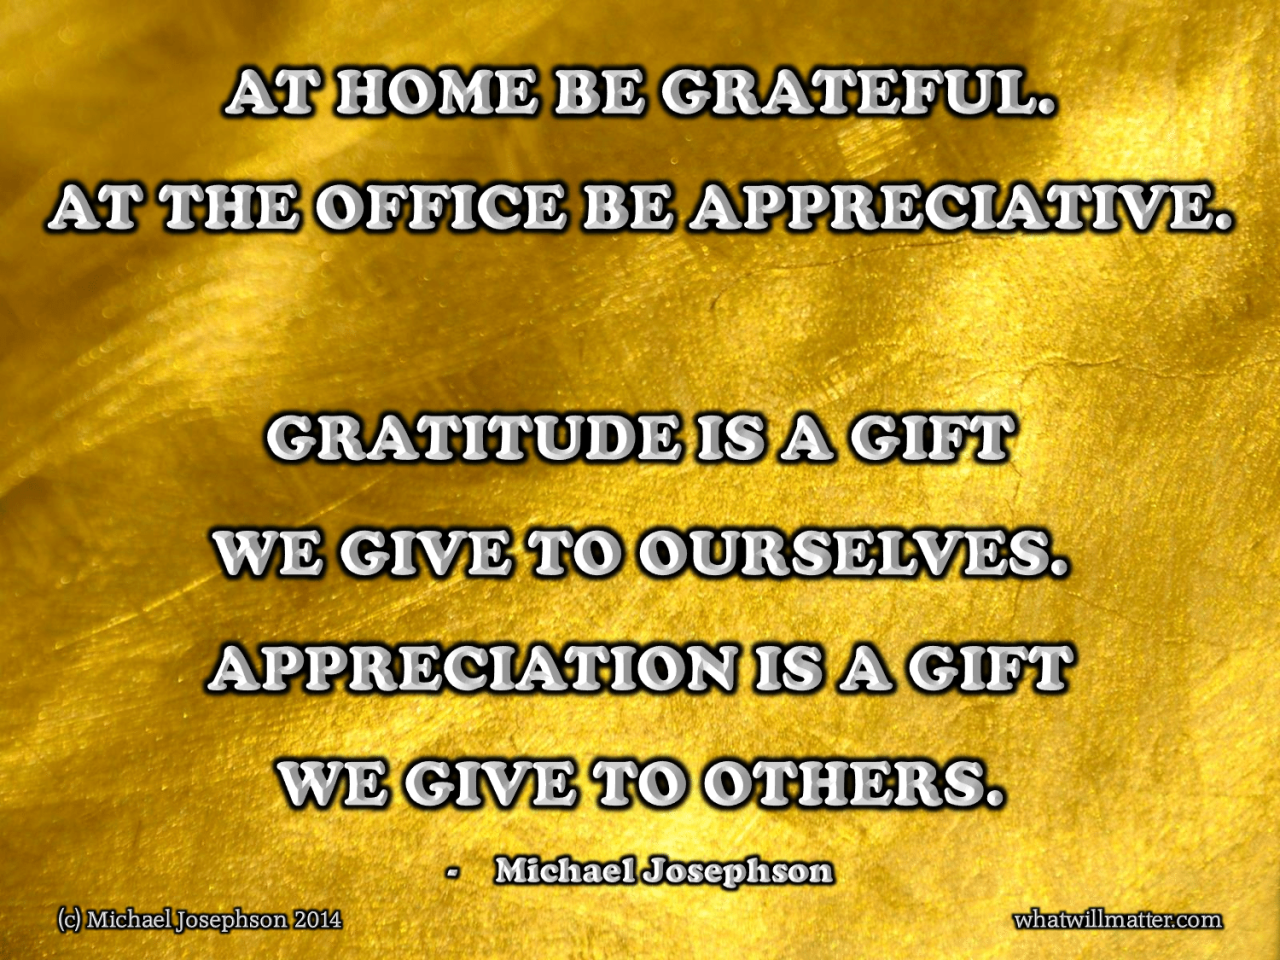 THE HEART OF THANKSGIVING Words & Images on Gratitude What Will Matter